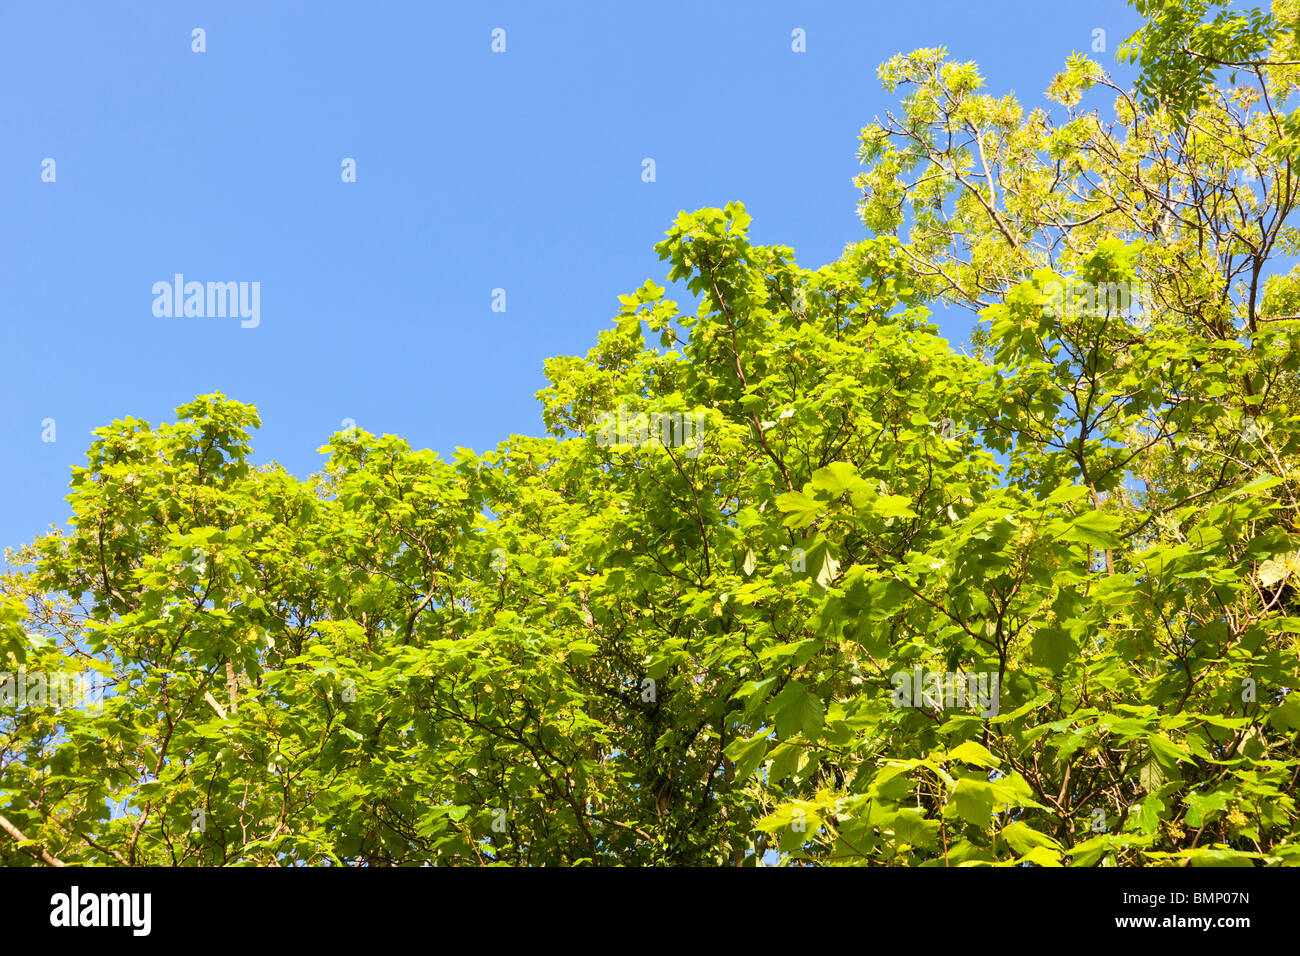 Green tree leaves against a blue sky Stock Photo